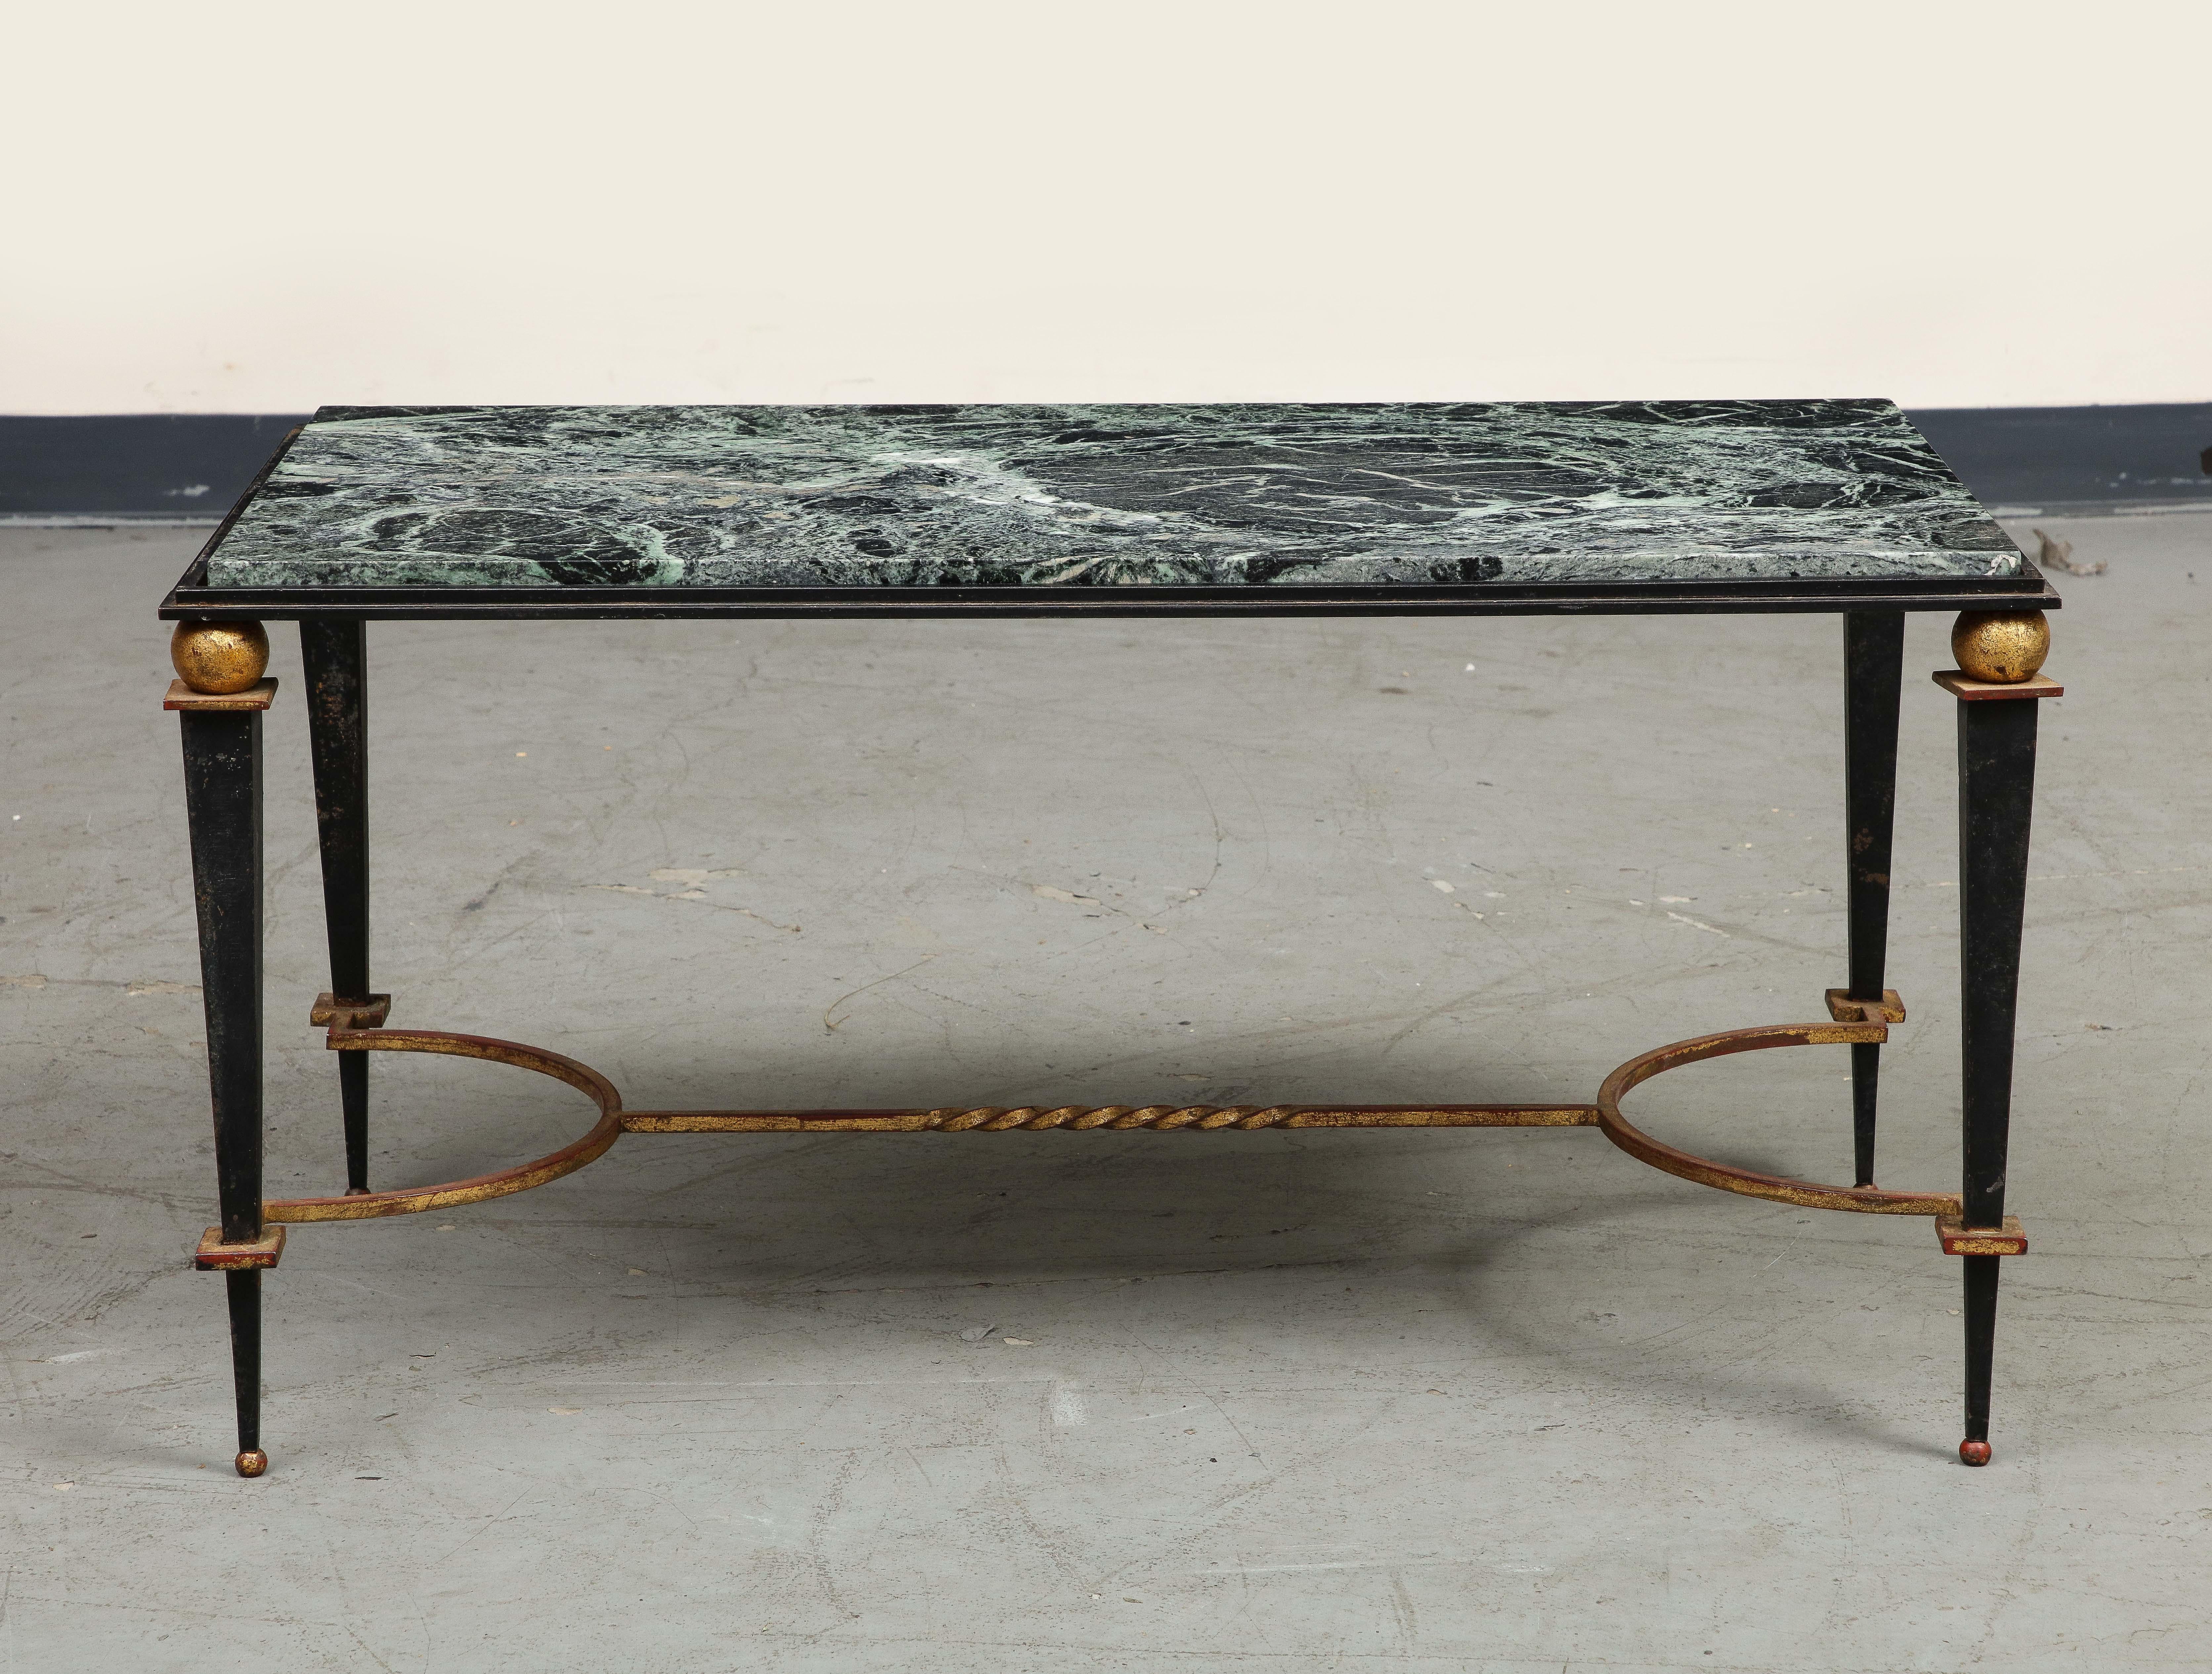 Neoclassical style midcentury French iron coffee table, in the style of Maison Jansen. Attractive black and dark green marble top sits on tapered iron legs with gilt details and a gilt stretcher.